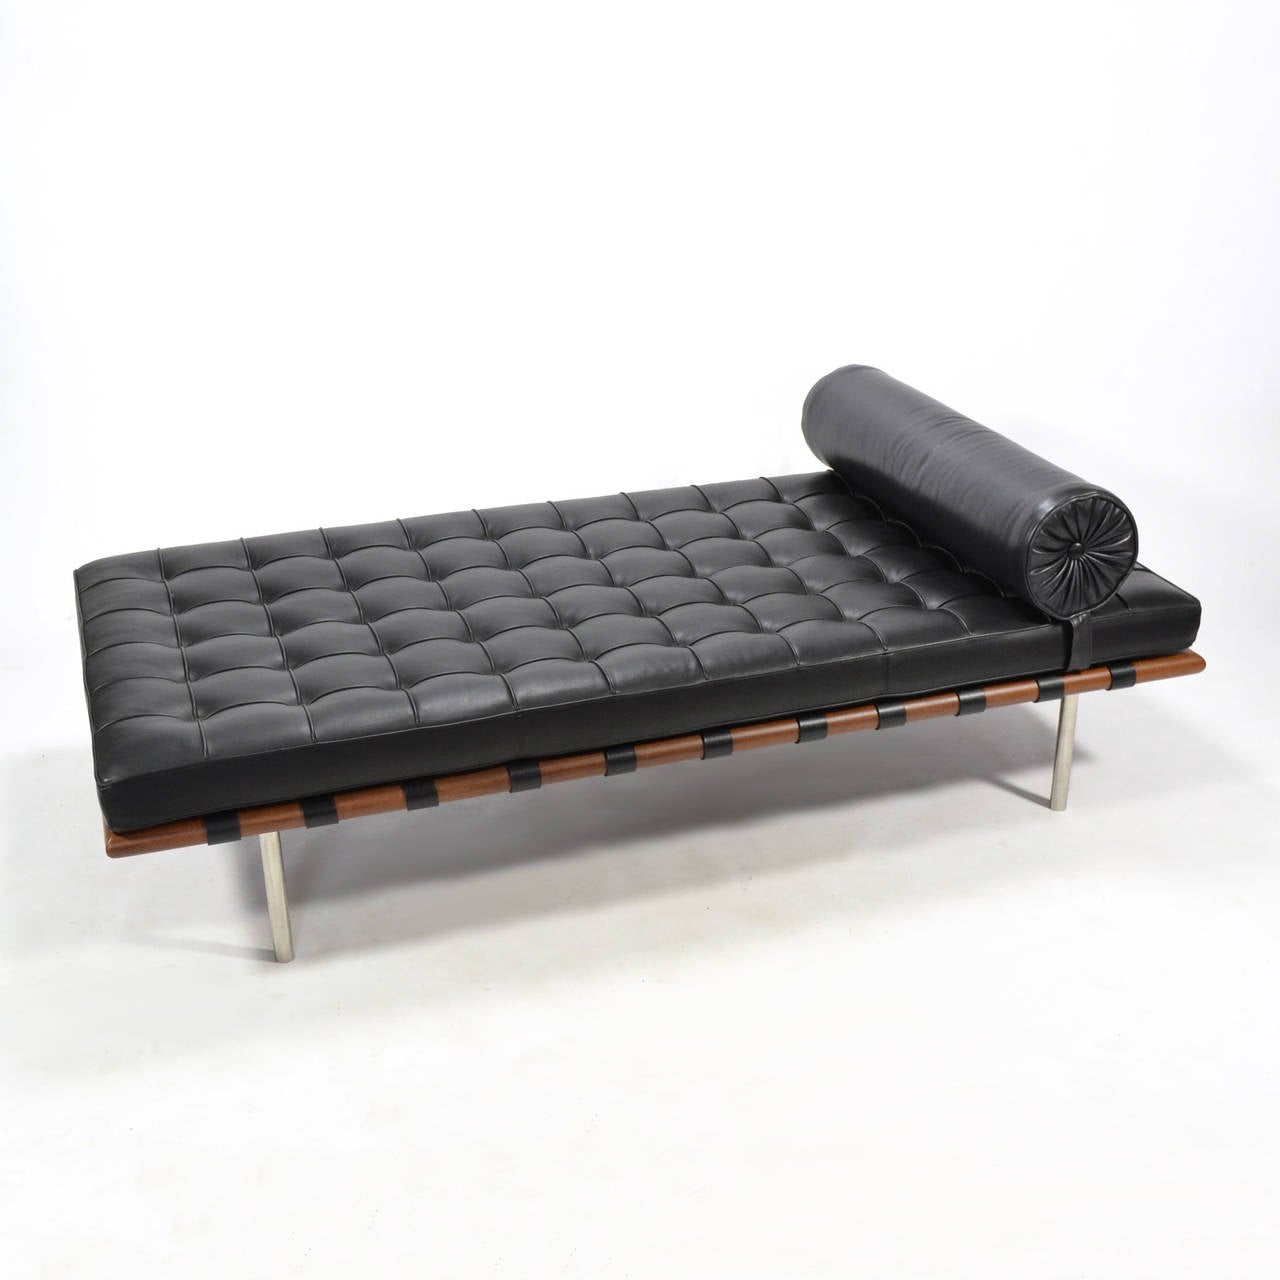 American Ludwig Mies van der Rohe Barcelona Daybed by Knoll